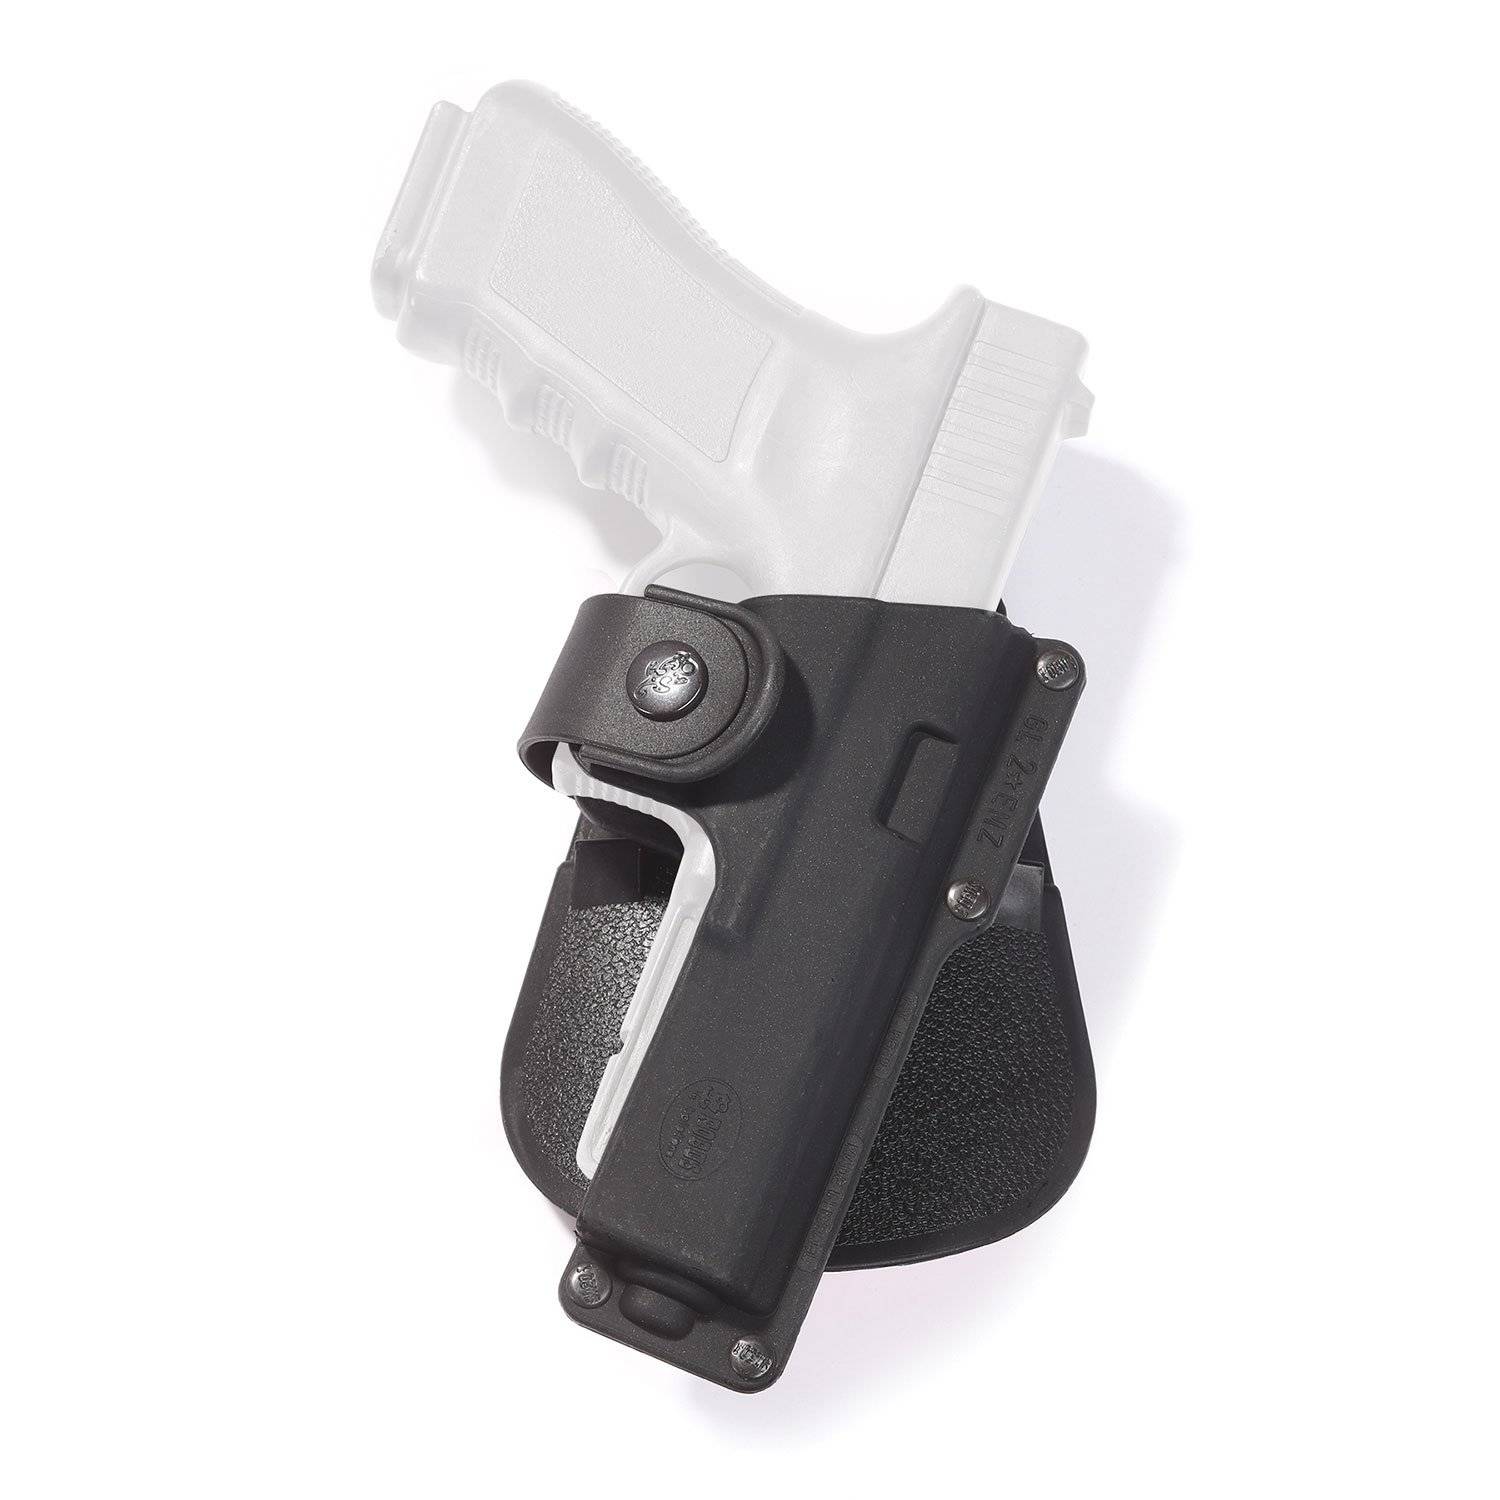 New Fobus Paddle Holster For Glock 42 New Light weight Design FREE SHIPPING 